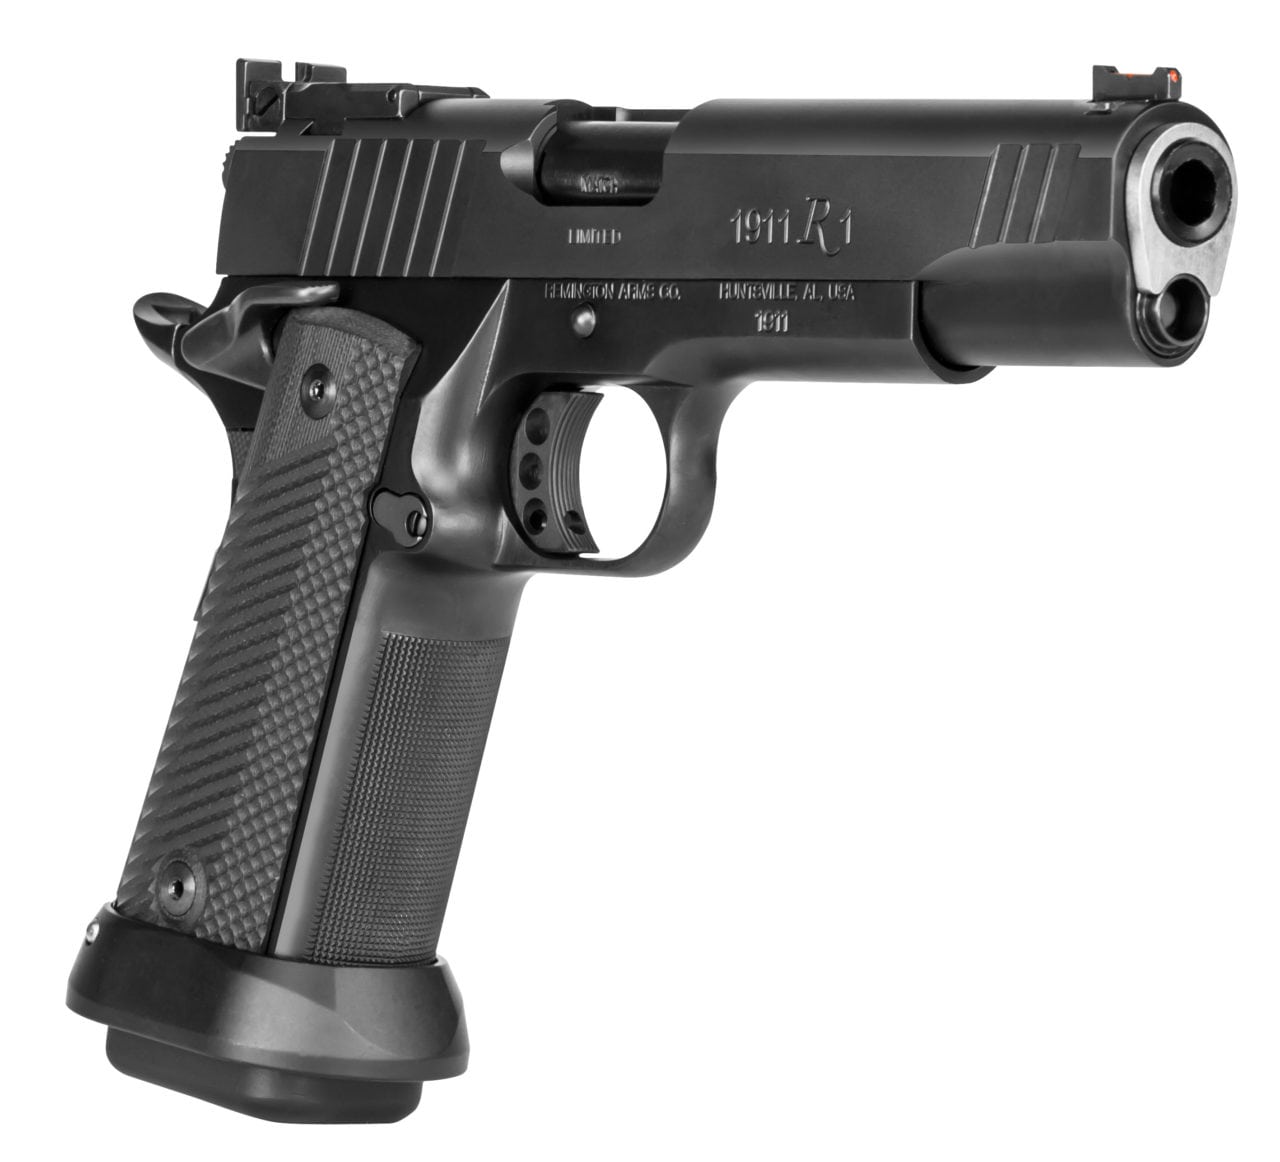 Built for Performance Match after Match The Remington Model 1911 R1 Limited Series